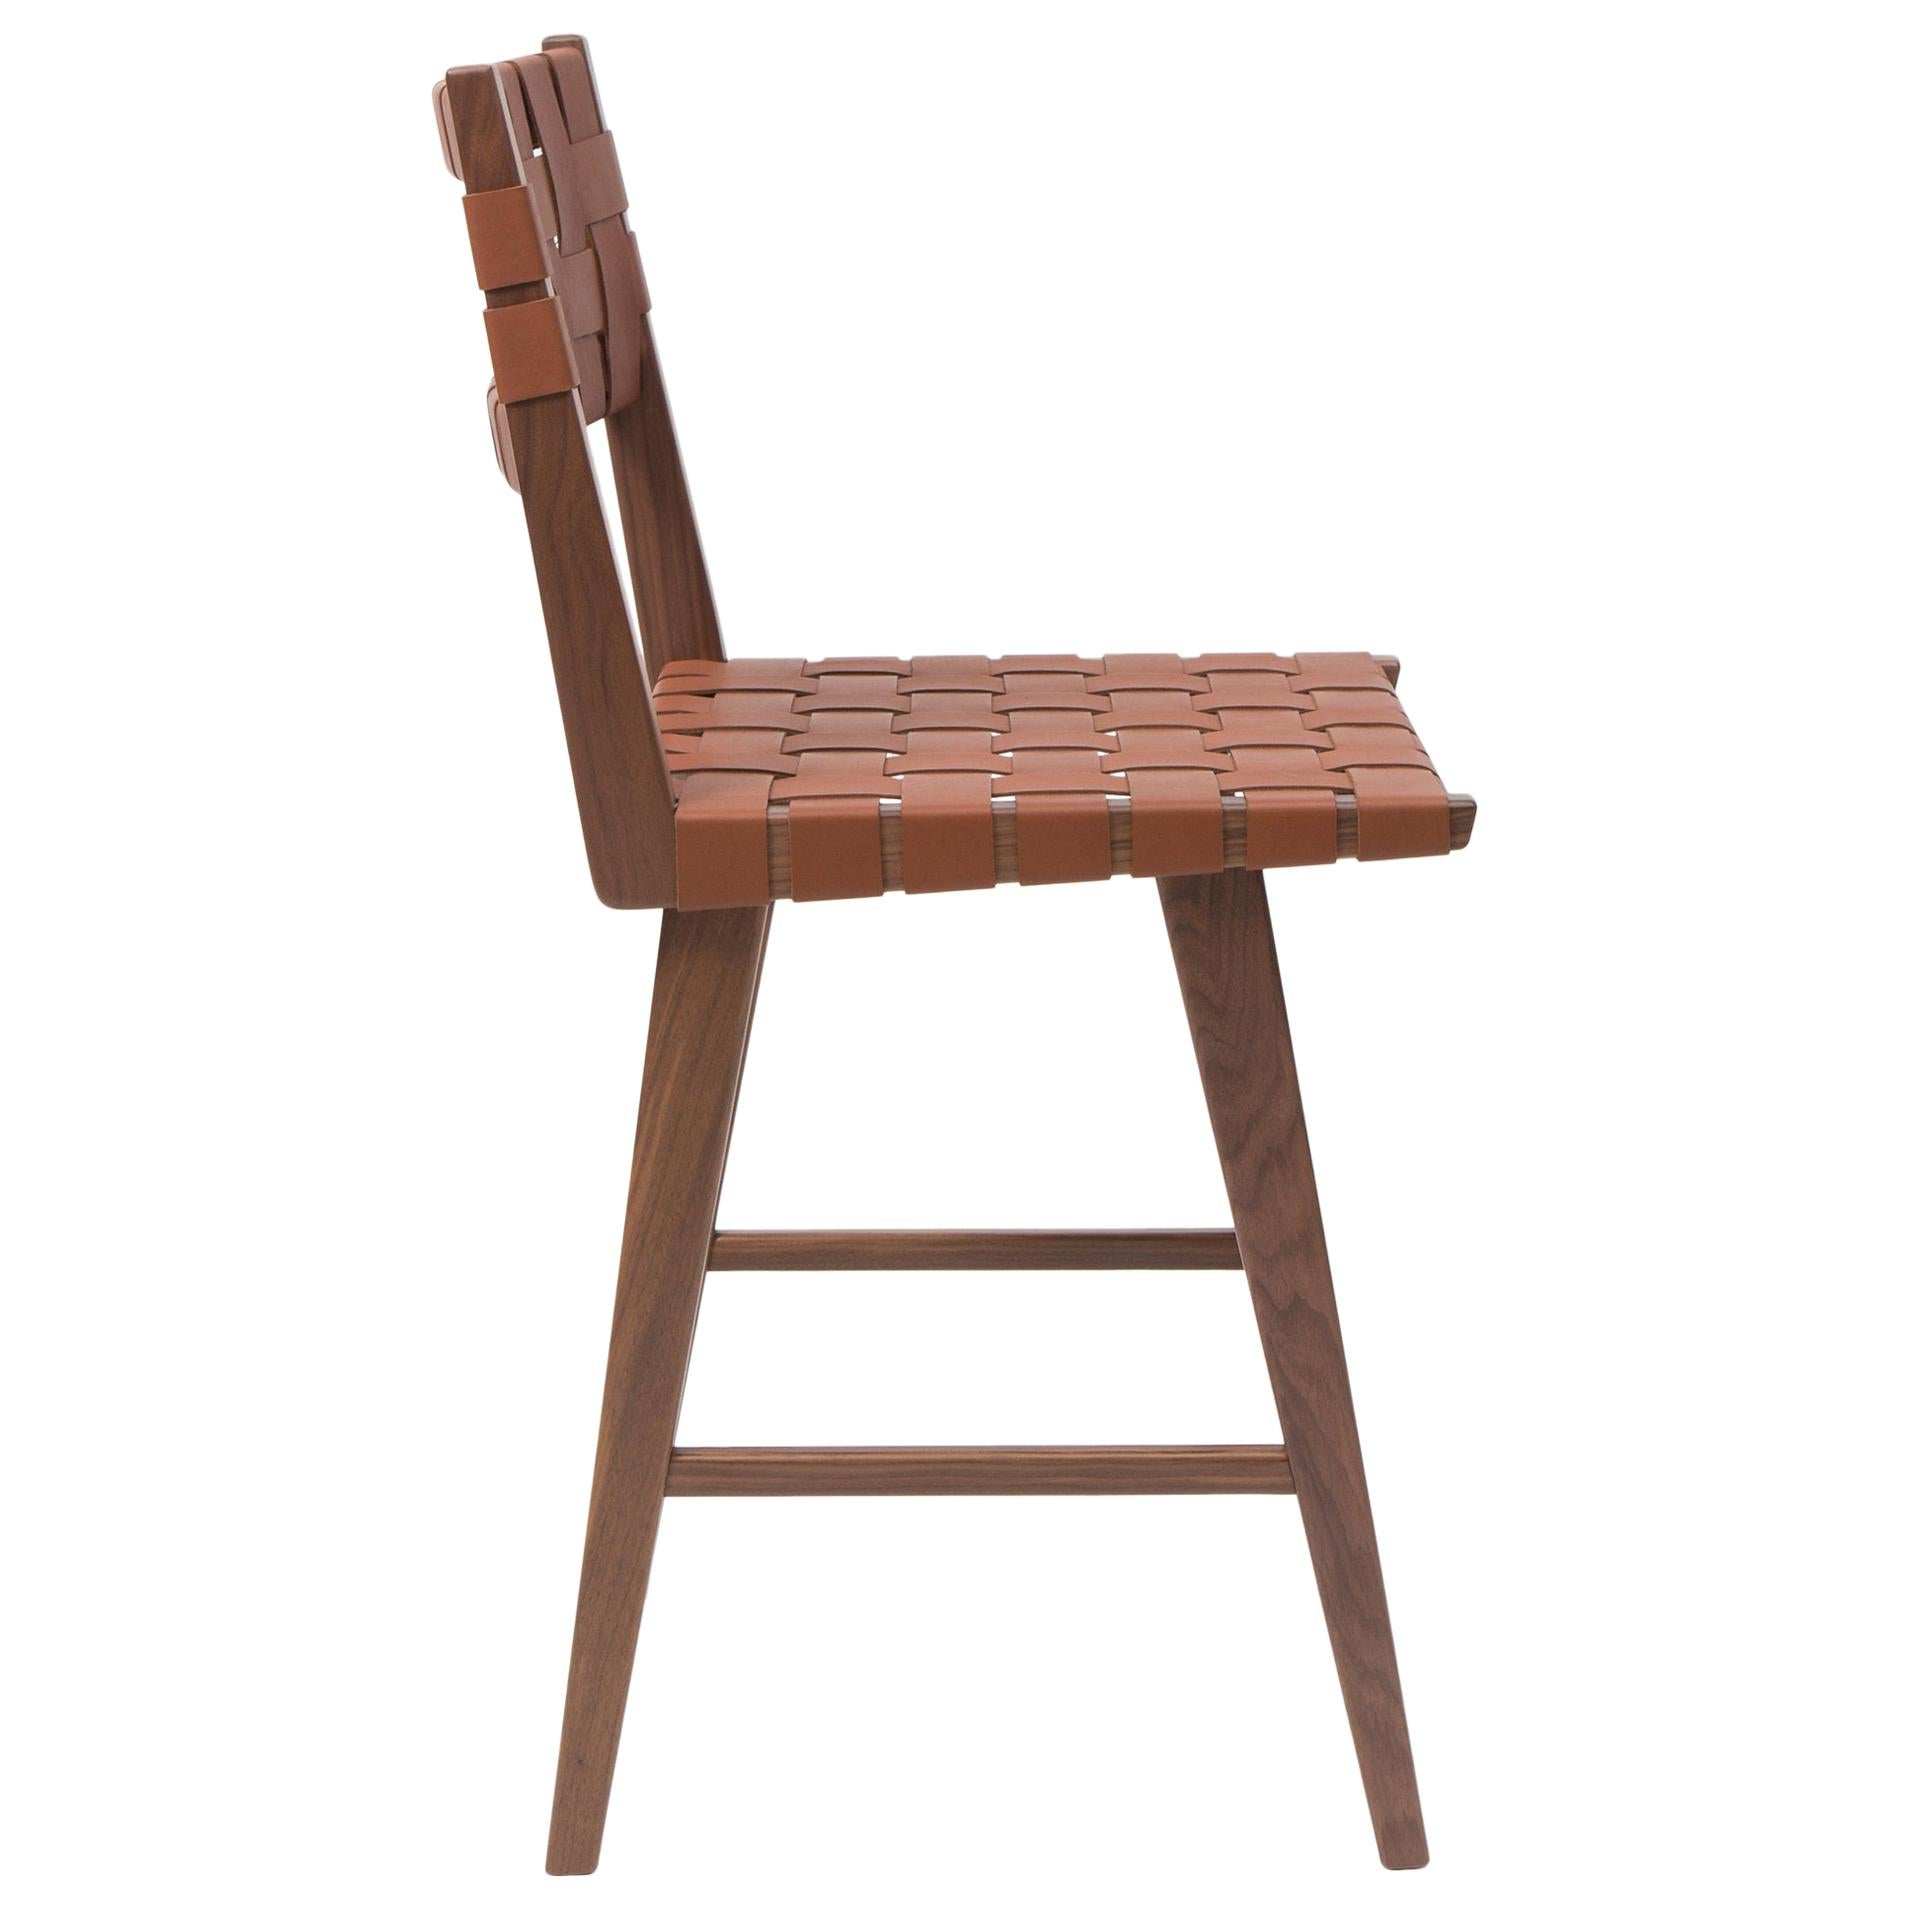 Woven Leather Backed Bar Stool in Walnut and Tan Leather by Mel Smilow